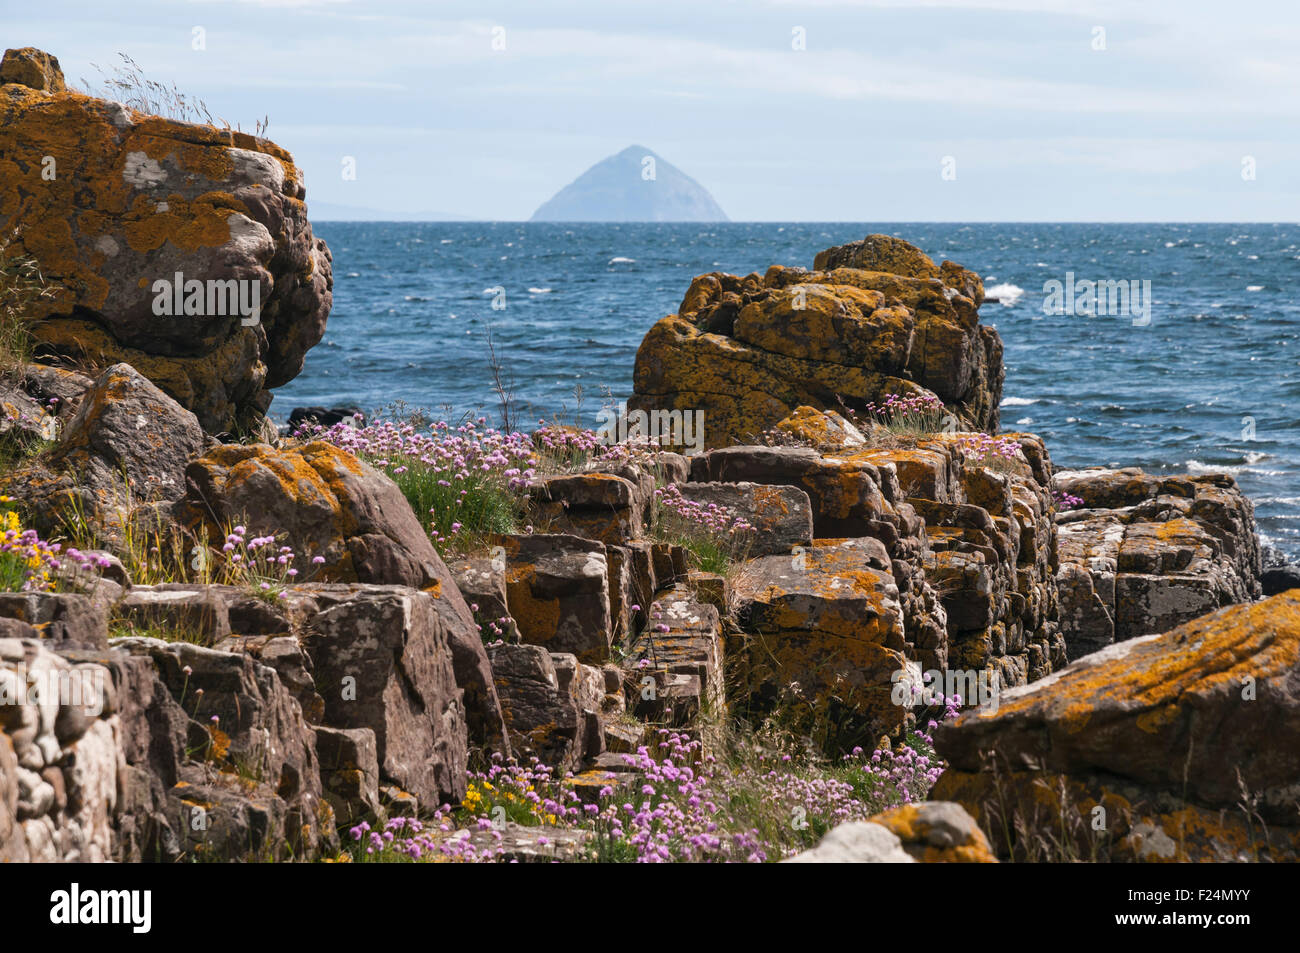 Looking from the Kildonan shoreline towards Ailsa Craig in the Firth of Clyde, Scotland Stock Photo